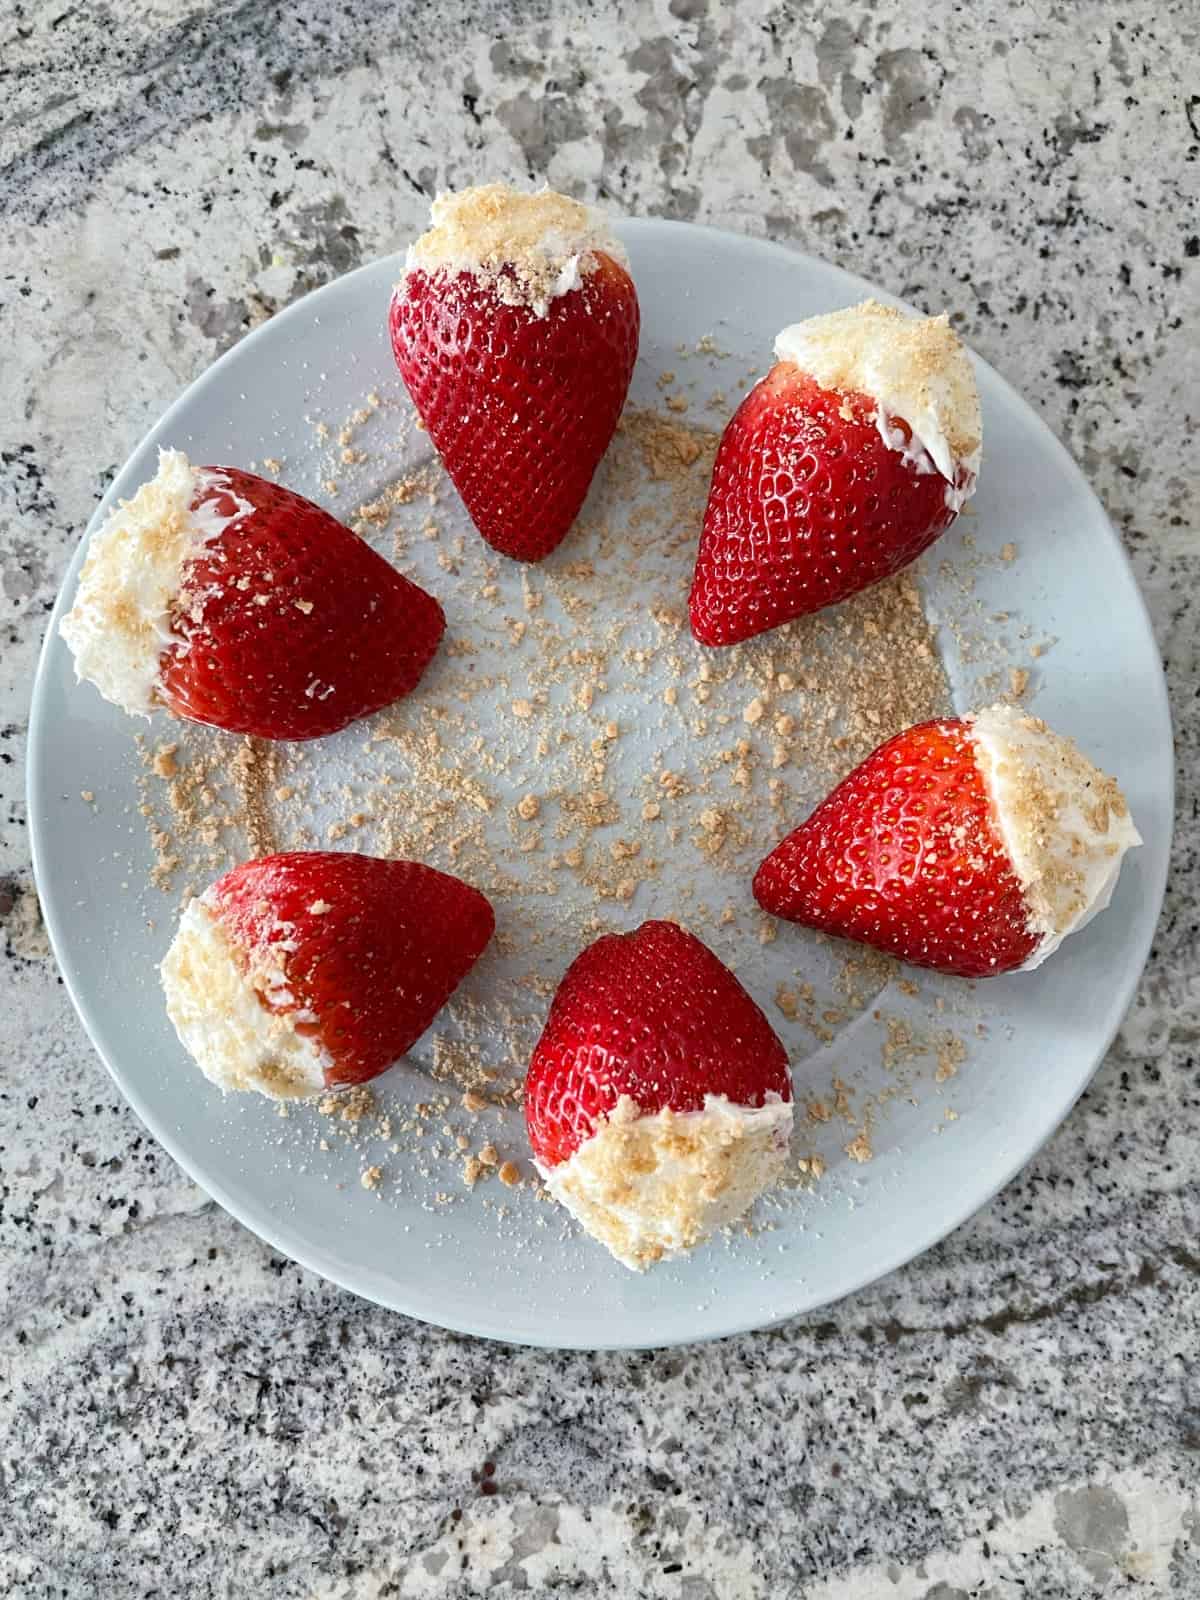 Cheesecake filled strawberries and topped with graham cracker crumbs on round serving plate.